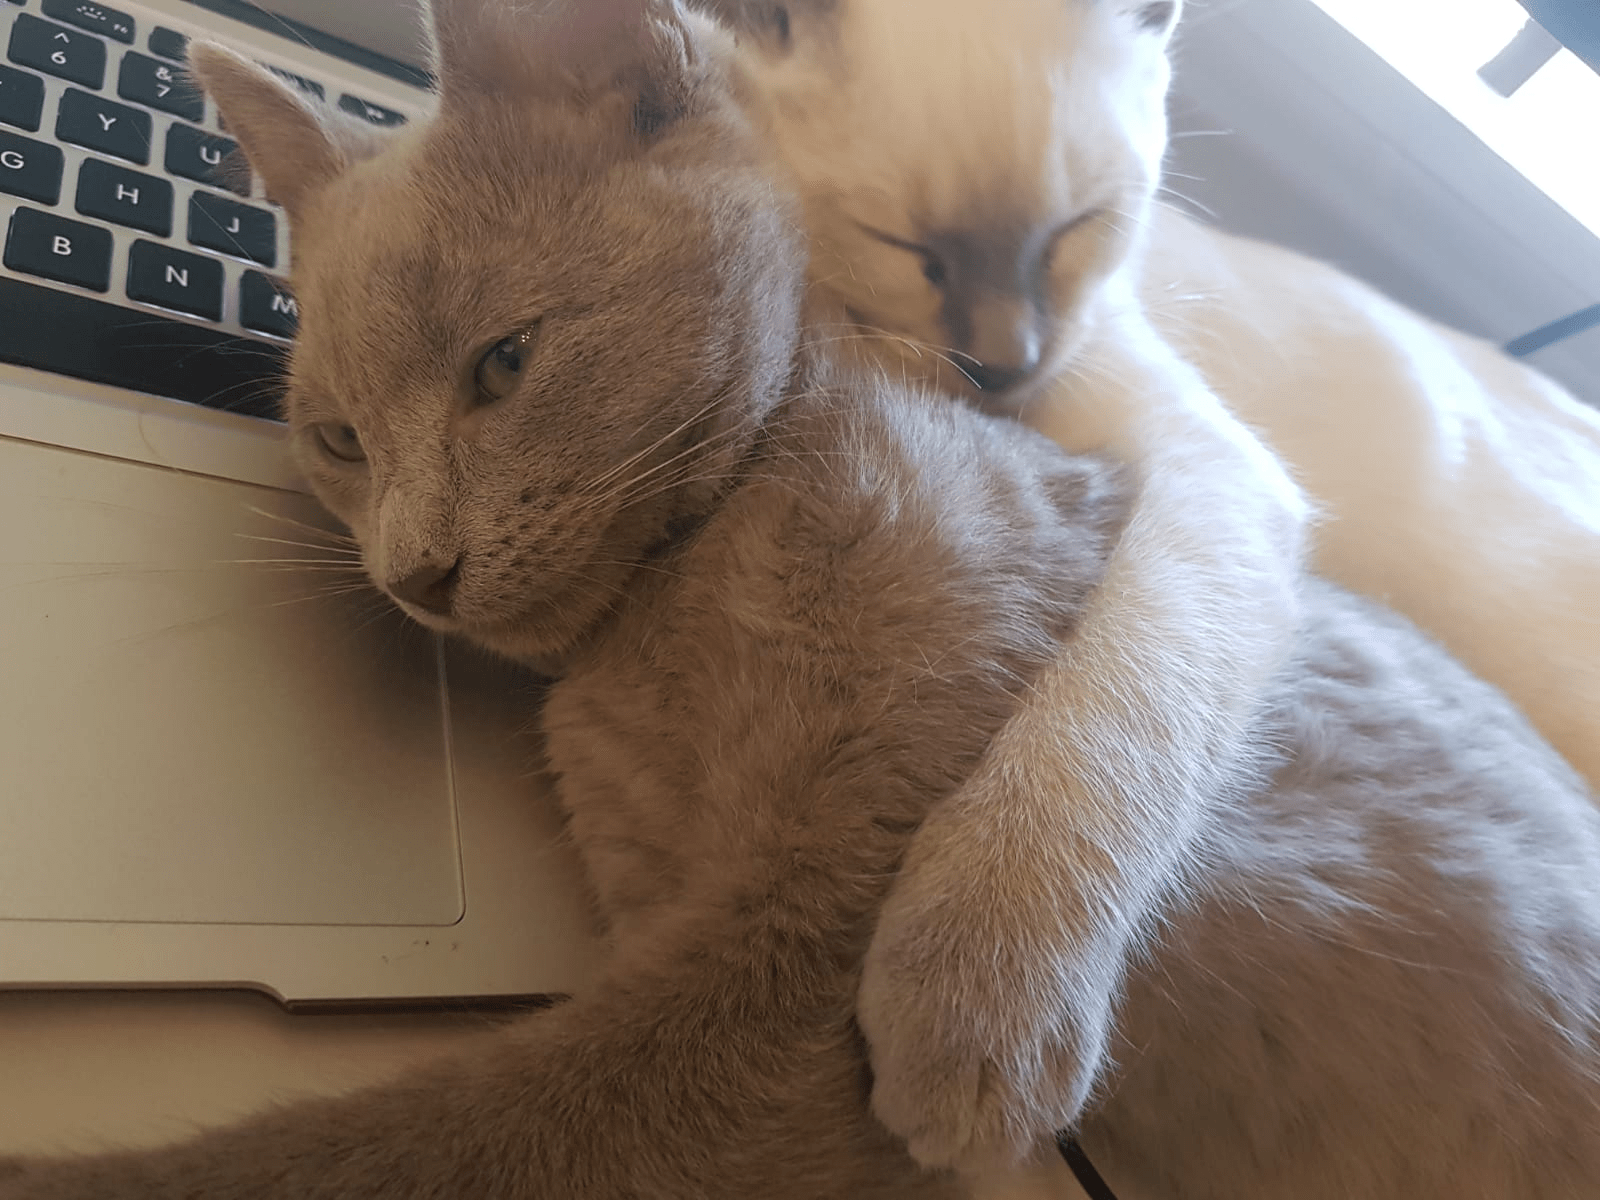 war room most pet friendly office in canada cat cuddle nap